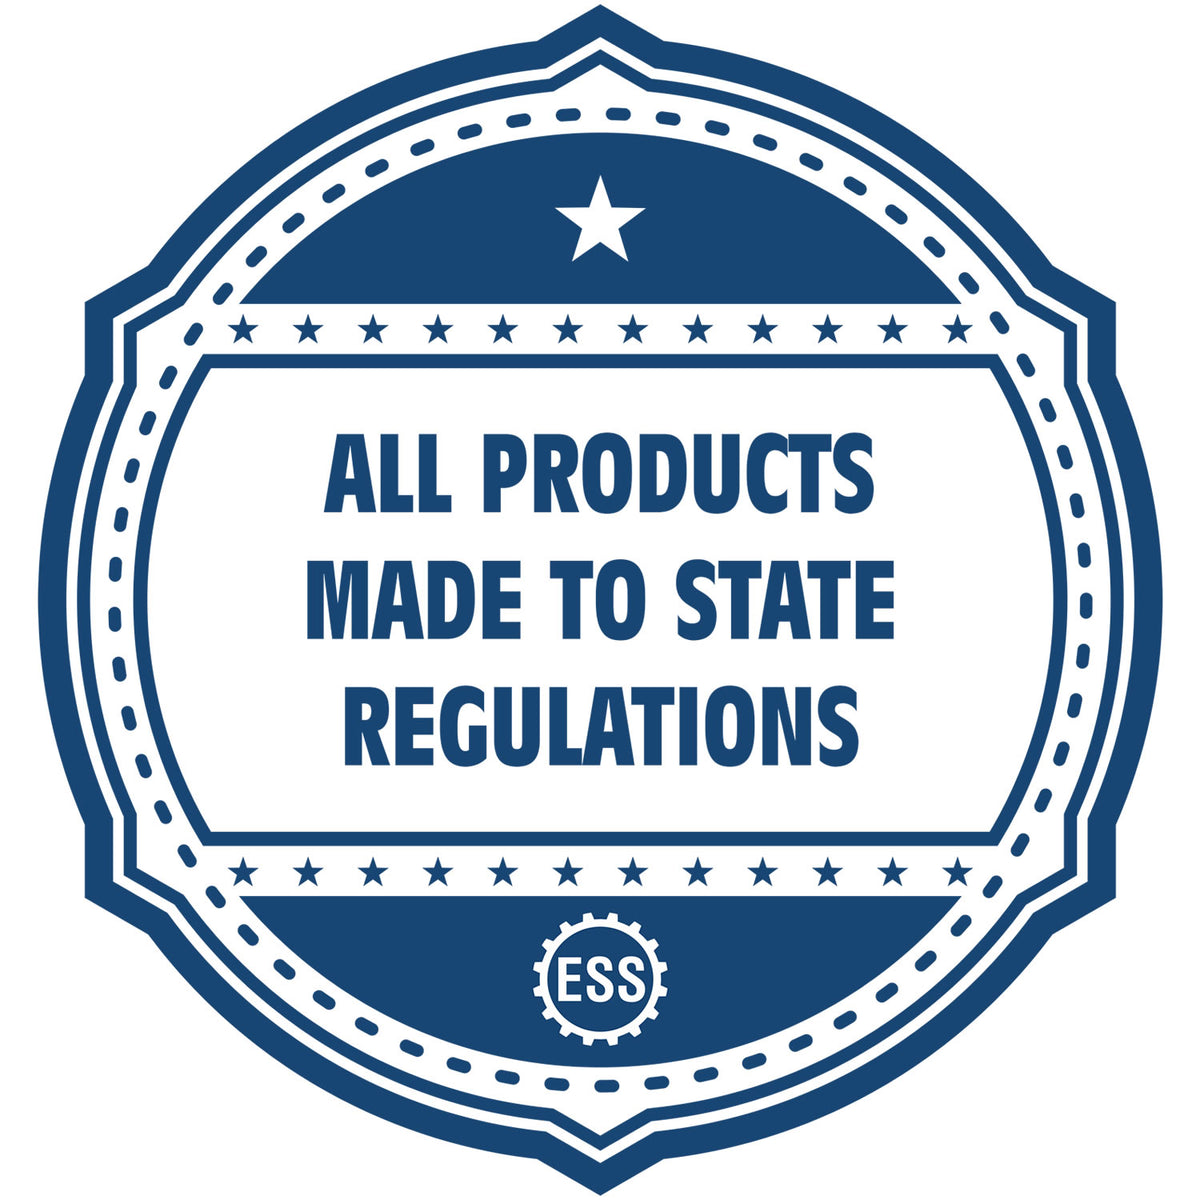 An icon or badge element for the Missouri Professional Engineer Seal Stamp showing that this product is made in compliance with state regulations.